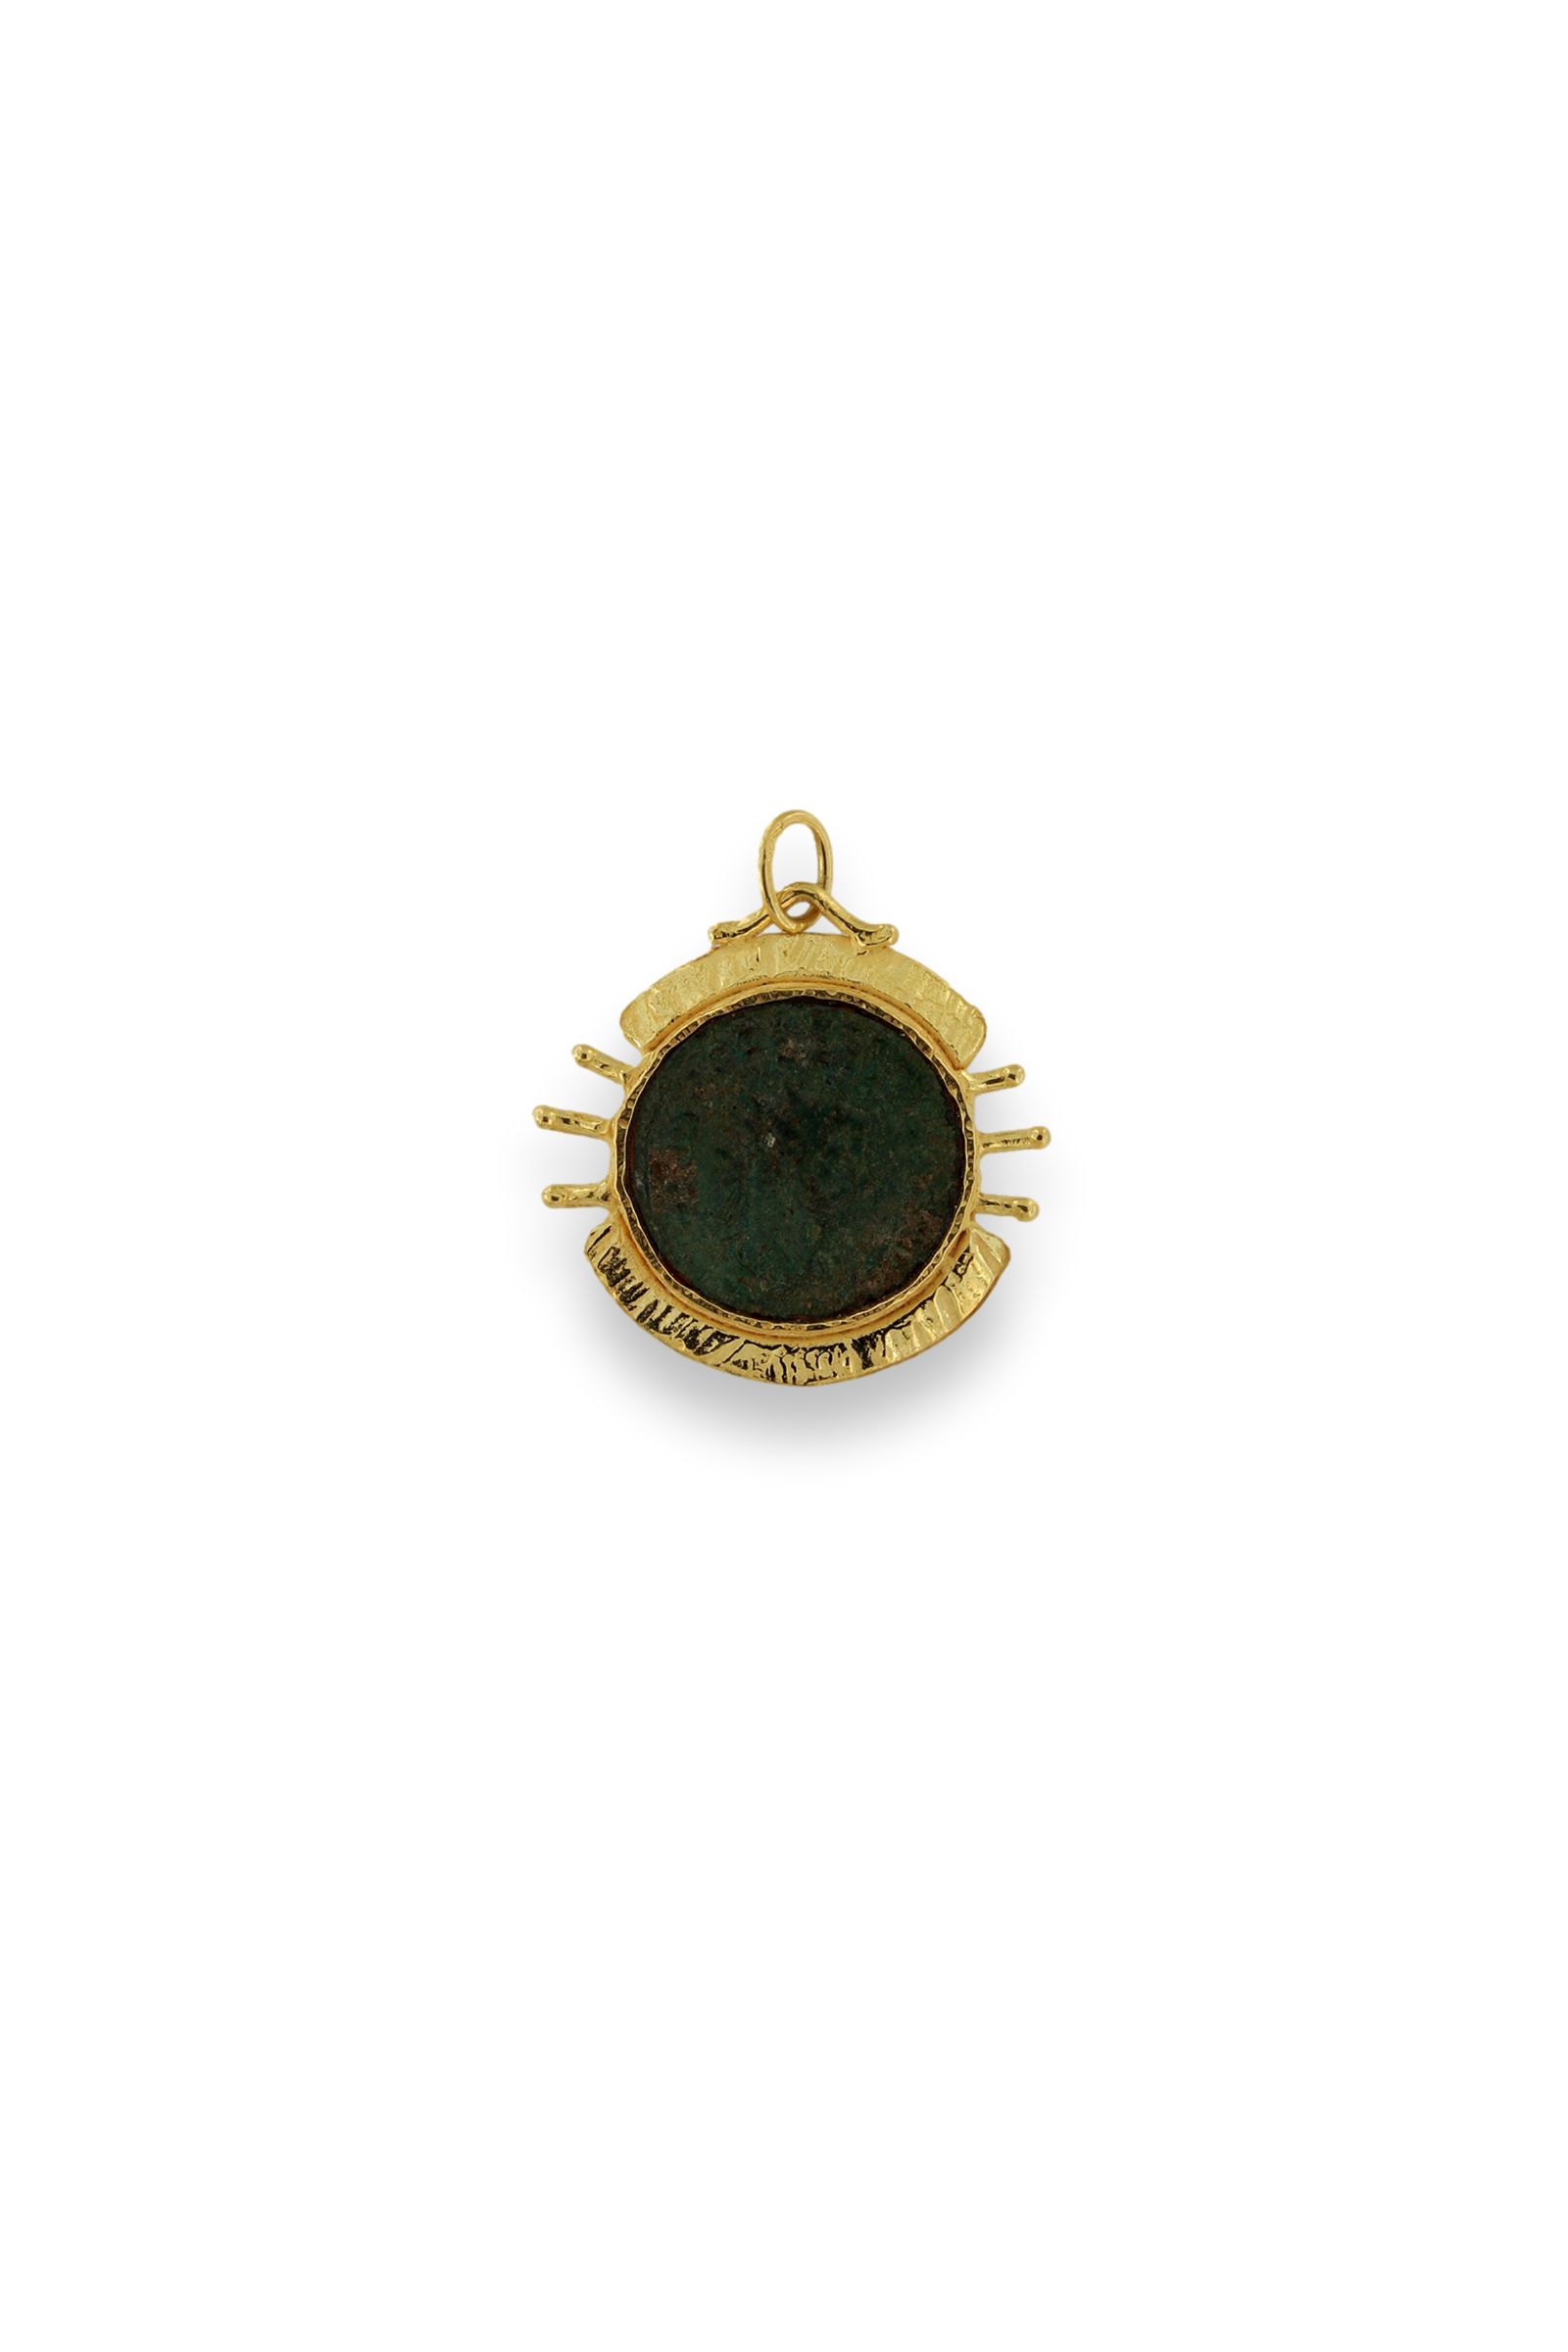 SH691A-18-Kt-Yellow-Gold-Pendant-with-Roman-Coin-1_